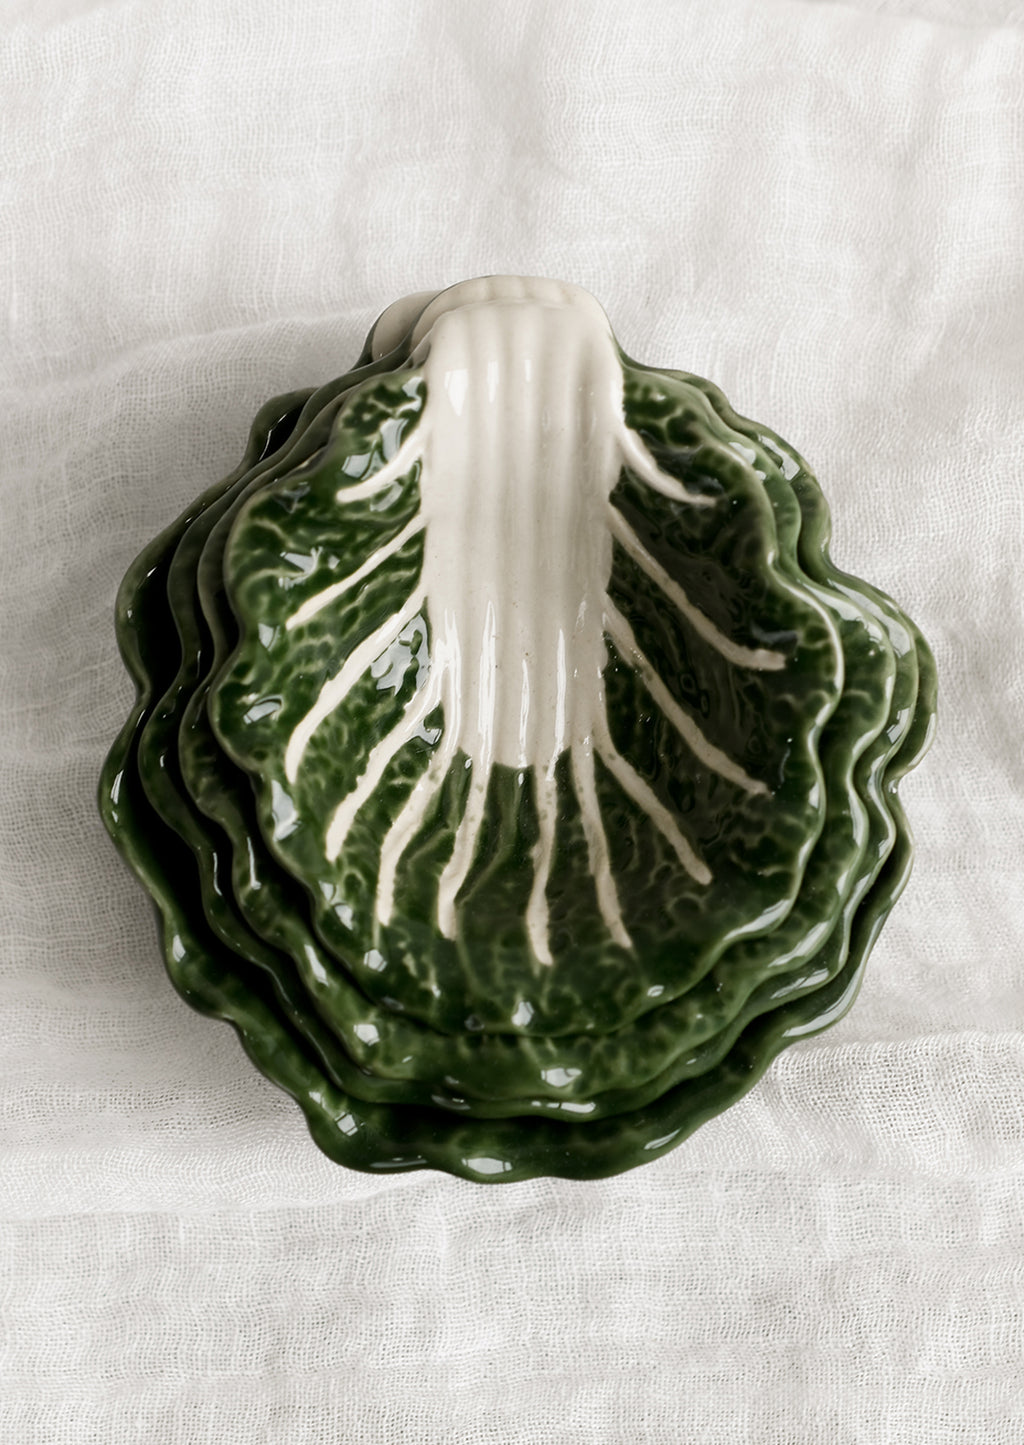 2: Cabbageware style ceramic bowls that look like green cabbage.